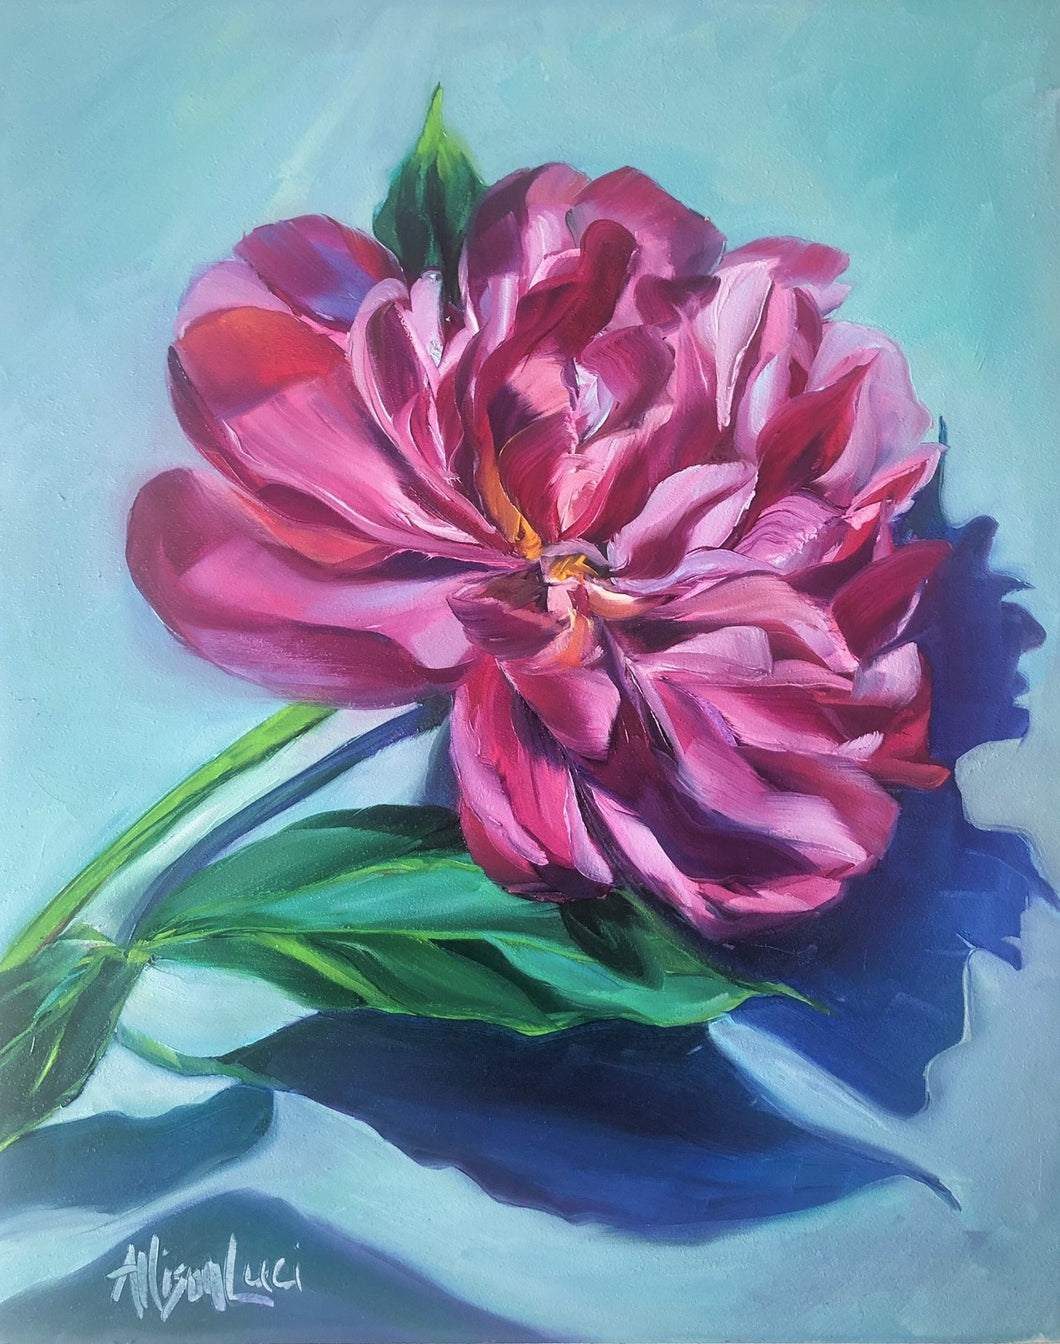 Miracles Blossom - Peony Oil Painting - 8x10